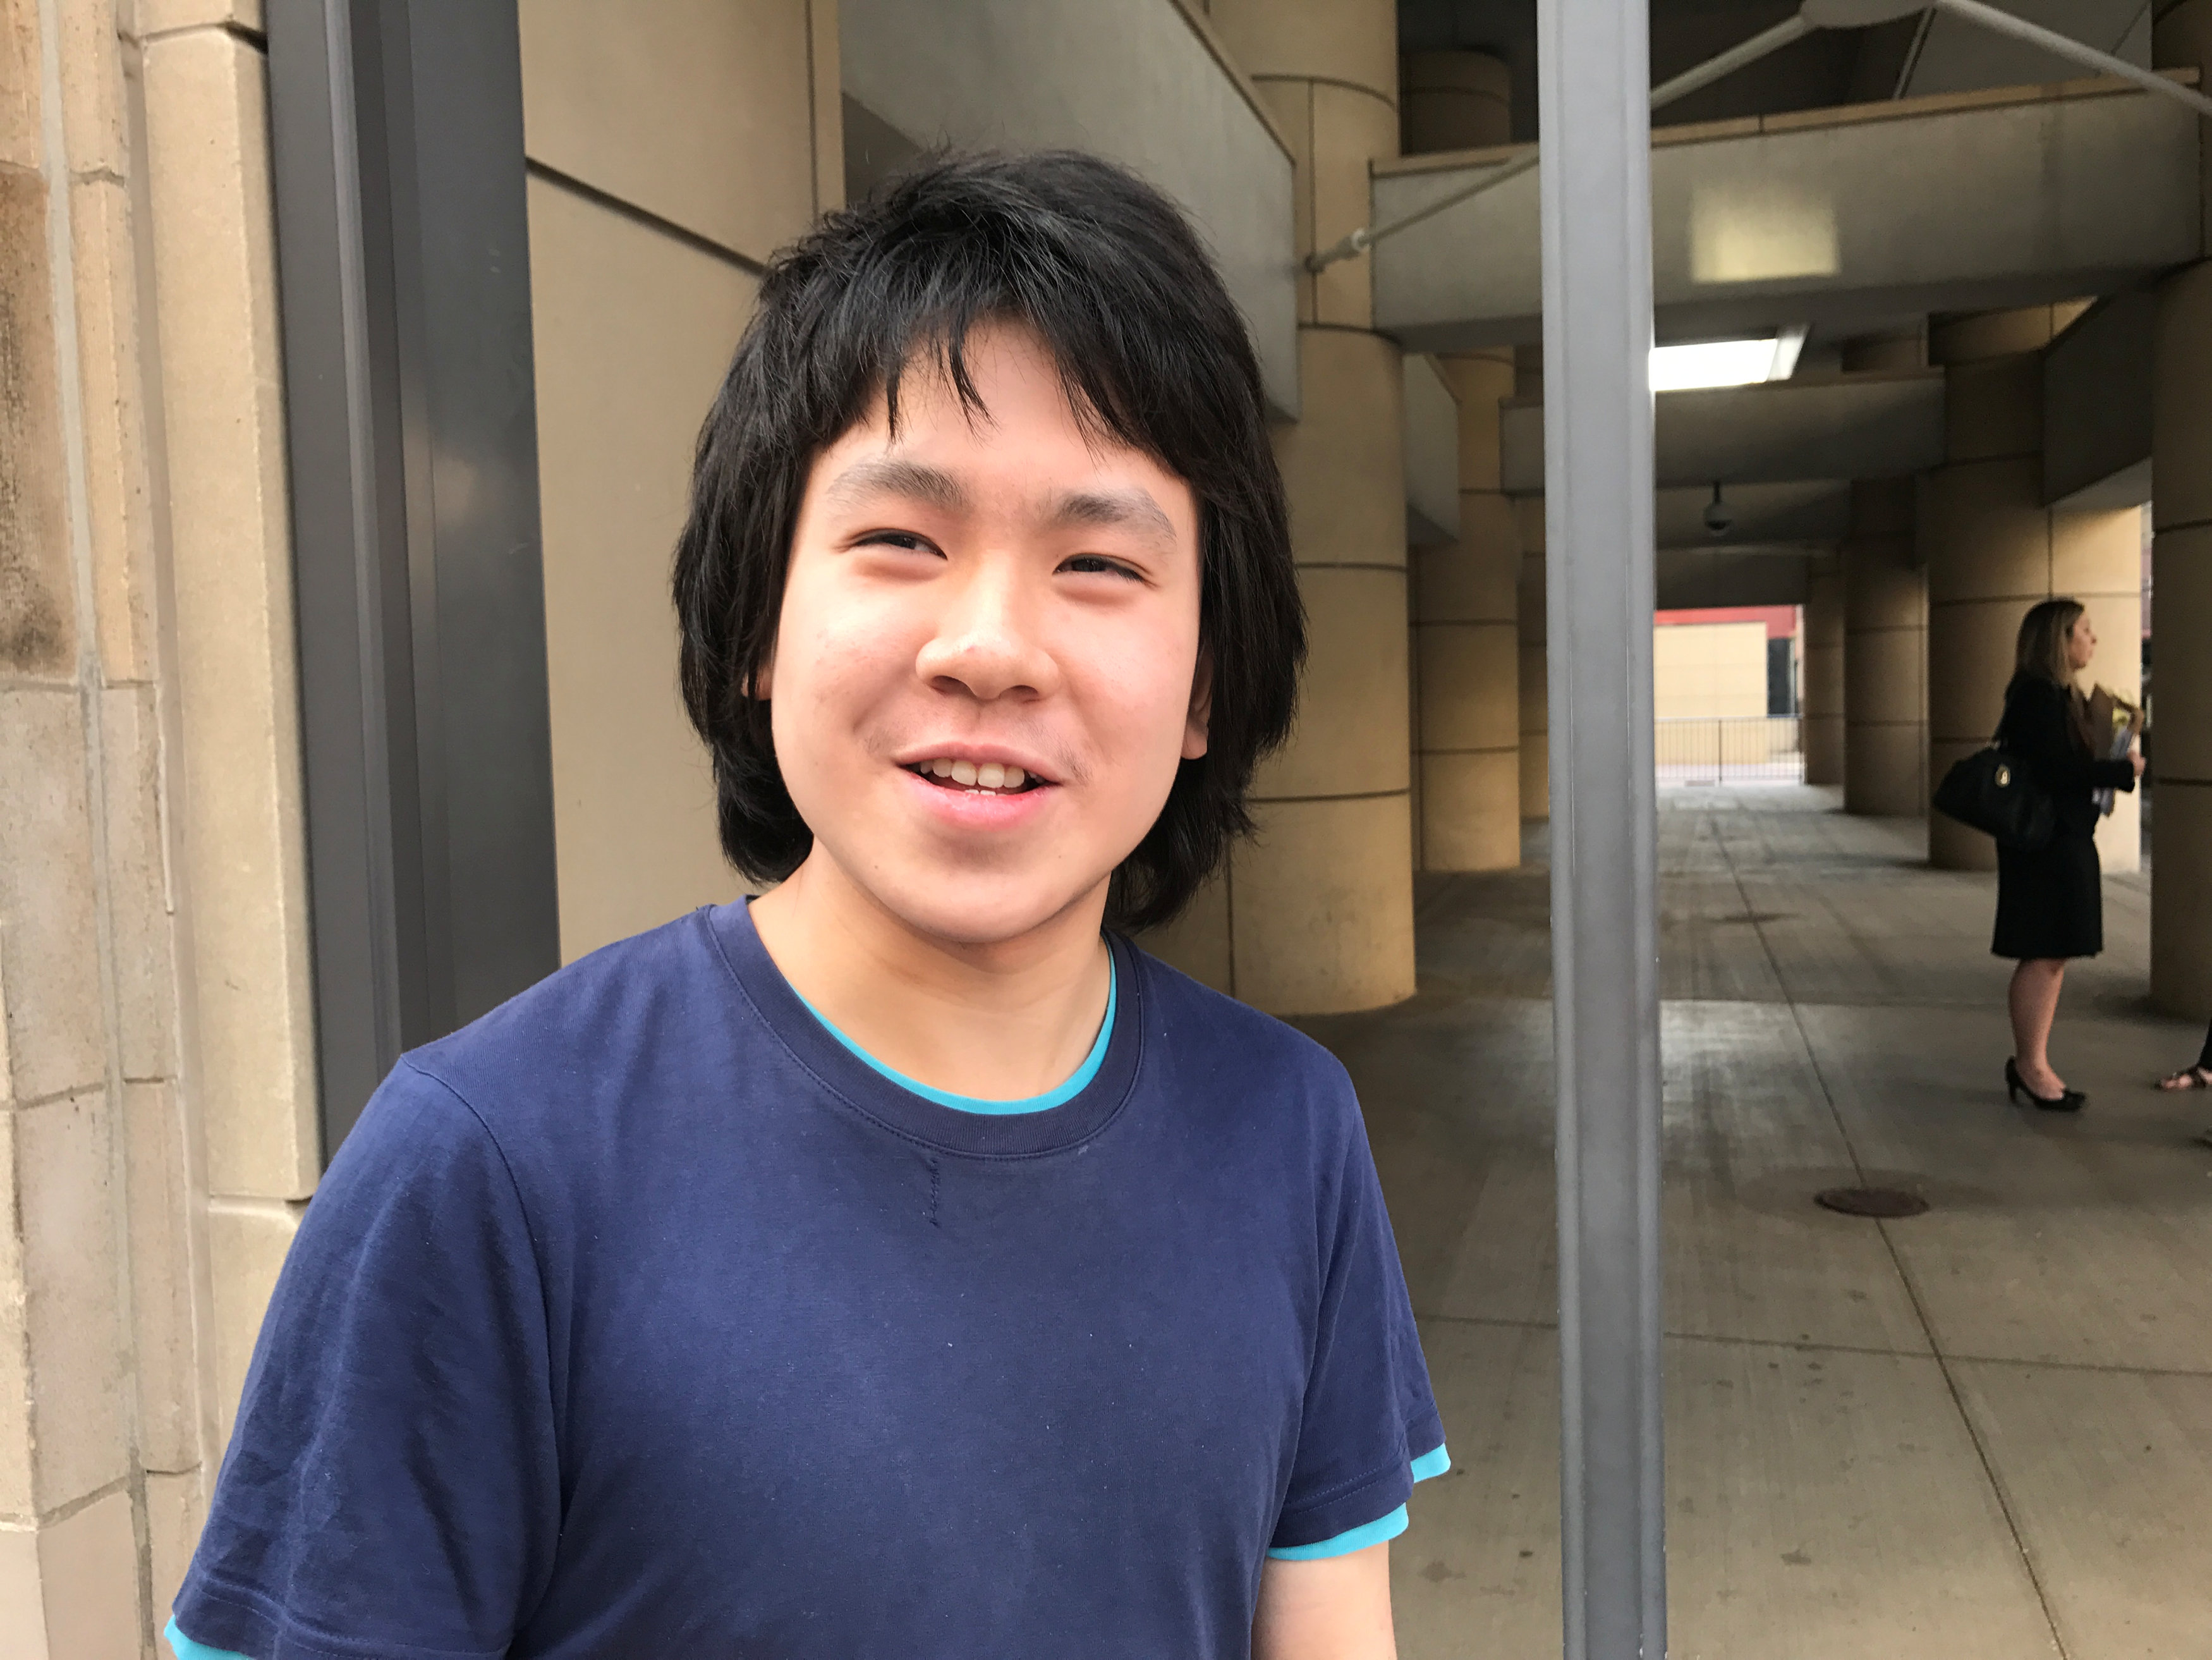 Amos Yee, 18, stands outside the United Sates Citizenship and Immigration Services offices after his release from detention in Chicago, Illinois, US, September 26, 2017. u00e2u20acu201d Reuters pic 